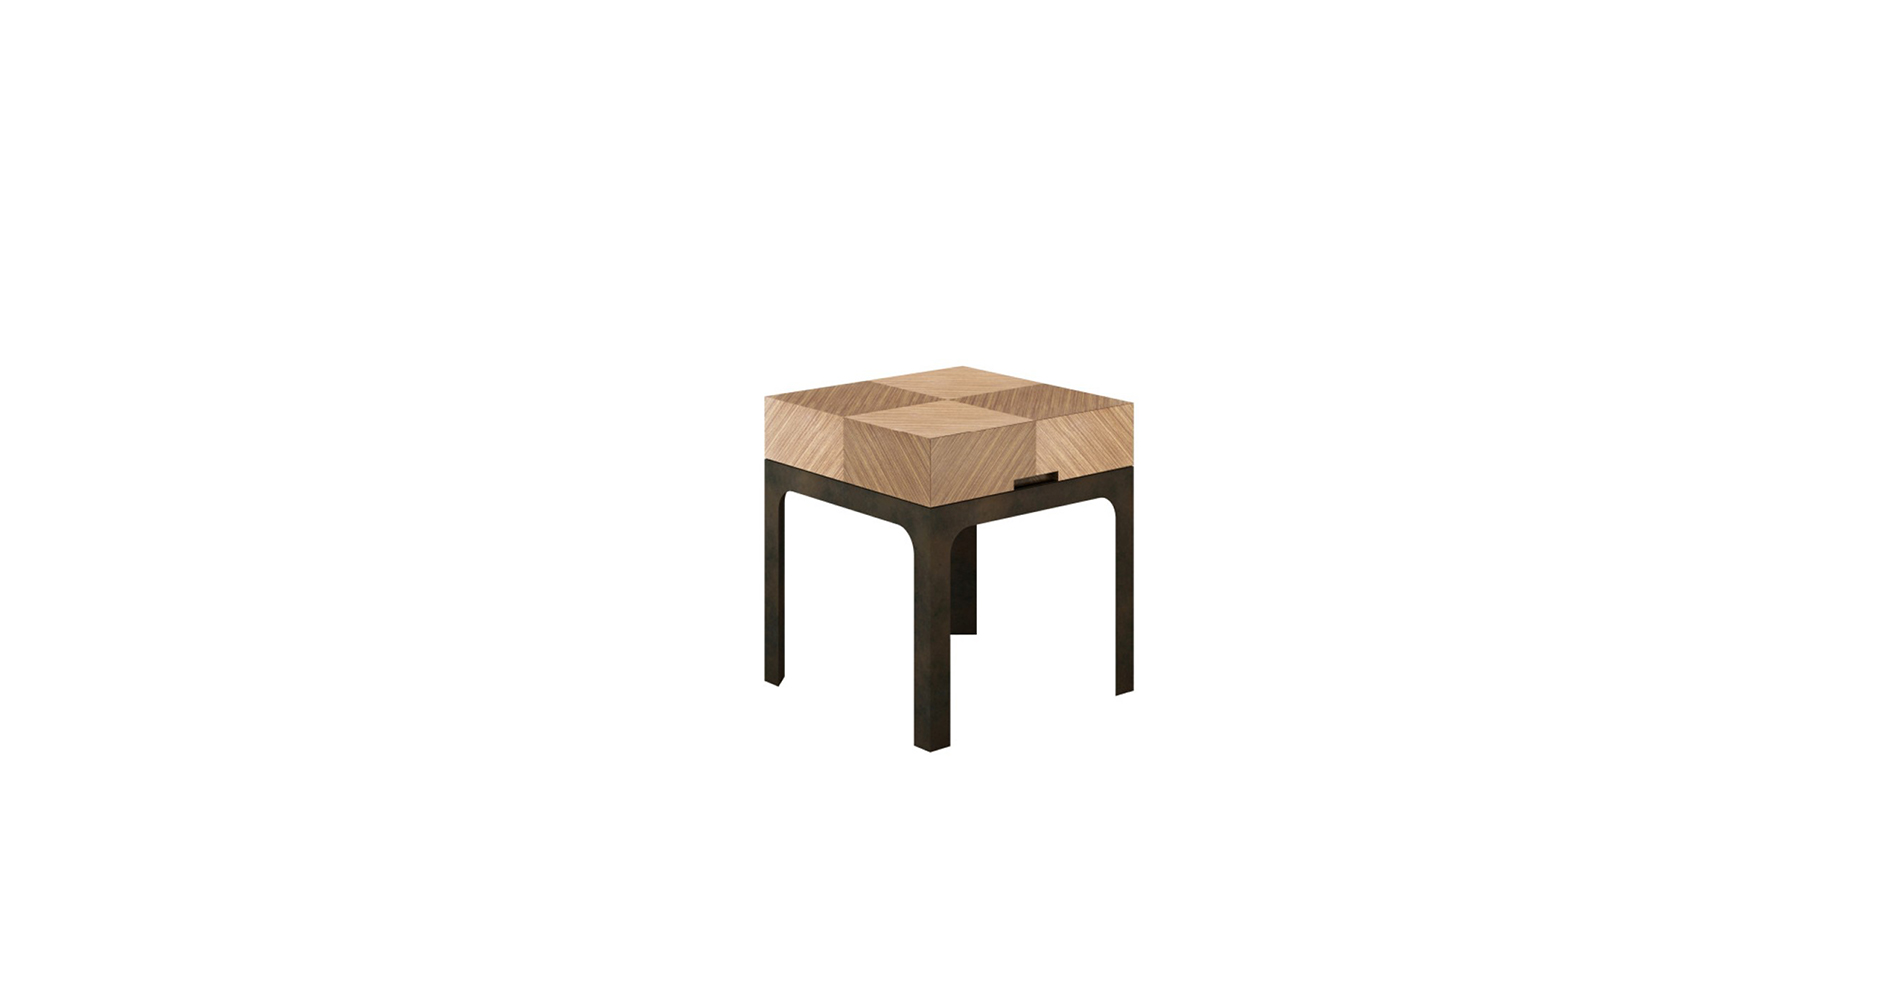 An image of Arche Side Table